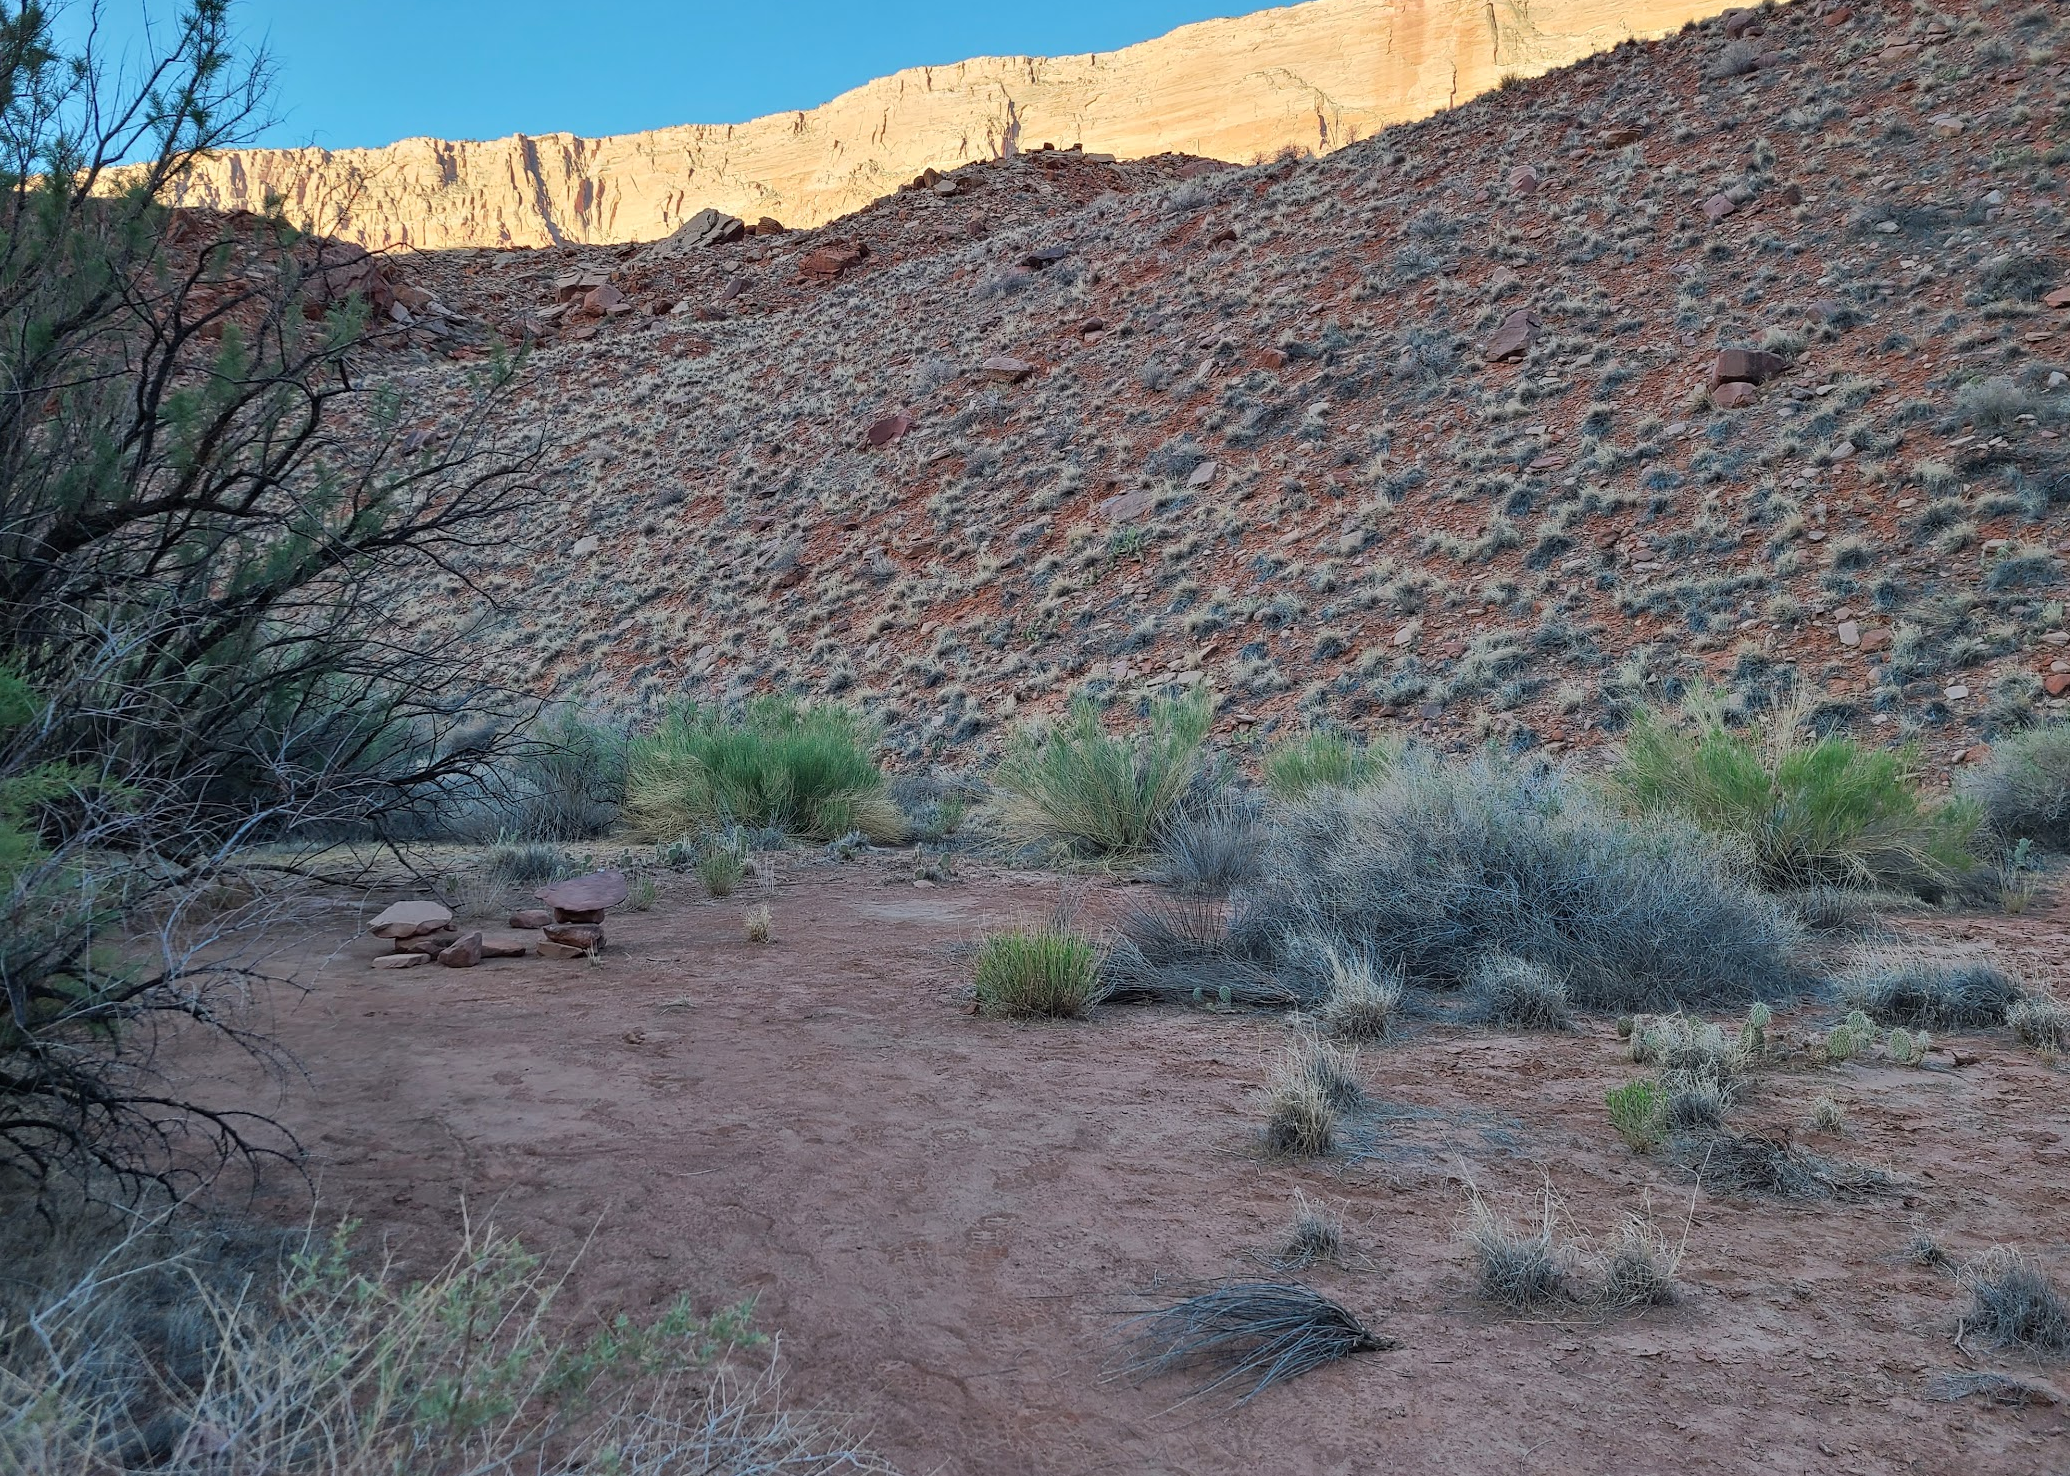 Camper submitted image from Paria Canyon Wilderness - Final Designated Campsite Before Lee's Ferry - 4